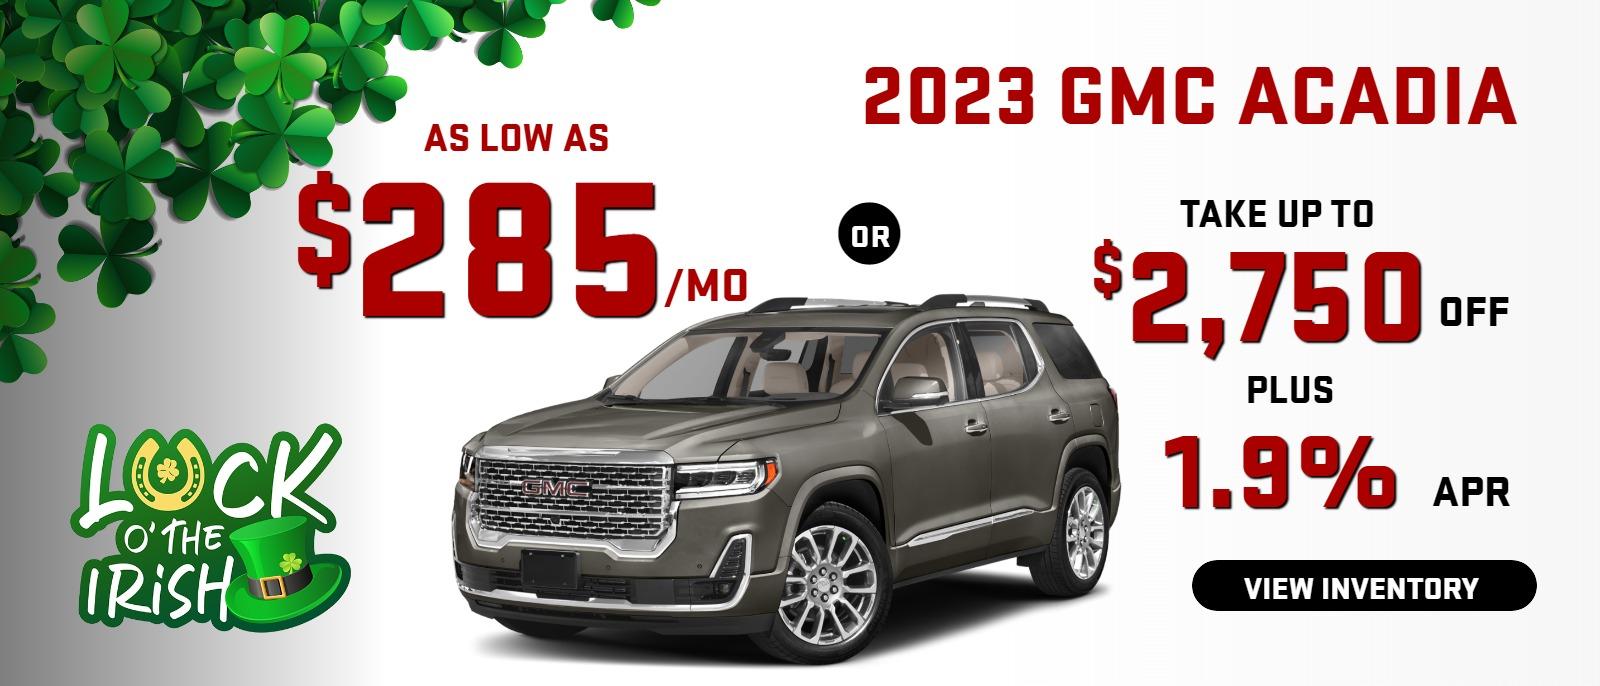 2023 GMC Acadia
Stock G6065

take up to $2750 OFF
 OR 
$285/mo
& 1.9% finance